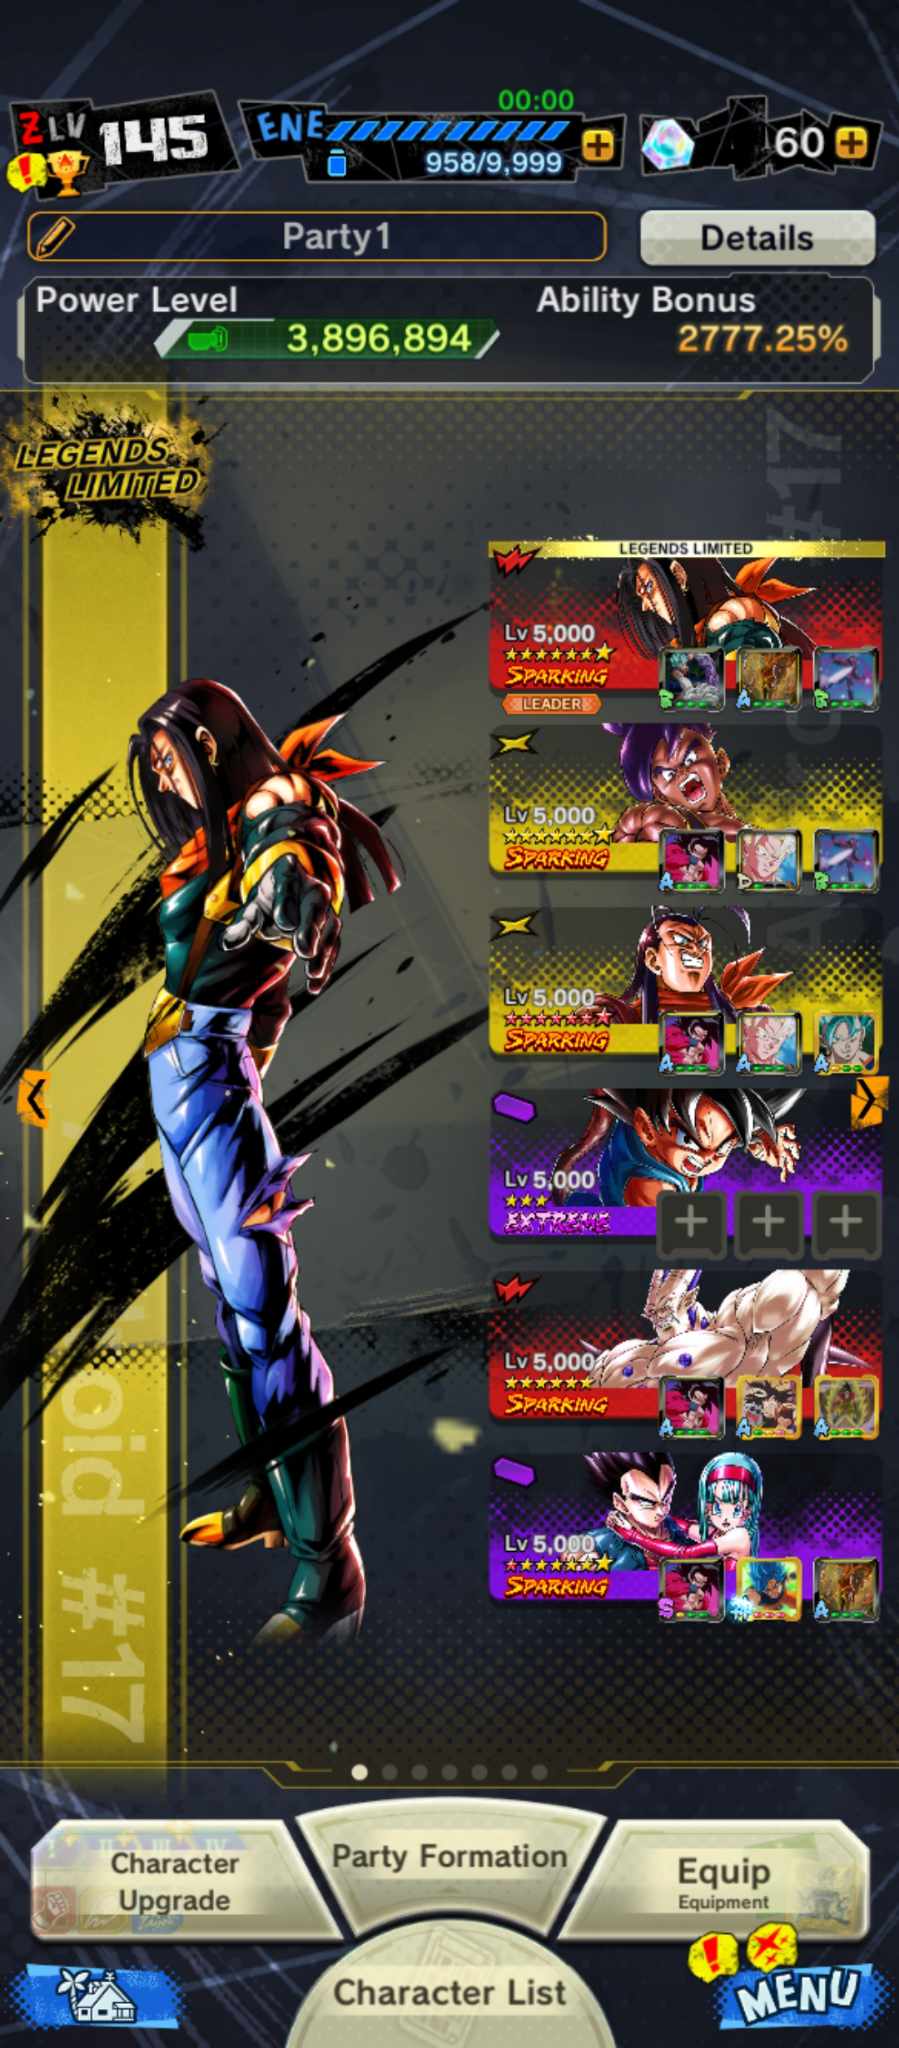 ANDROID + IOS, LOGIN BANDAI, 5 legend limited, Android 17 full stars, Soul 10k